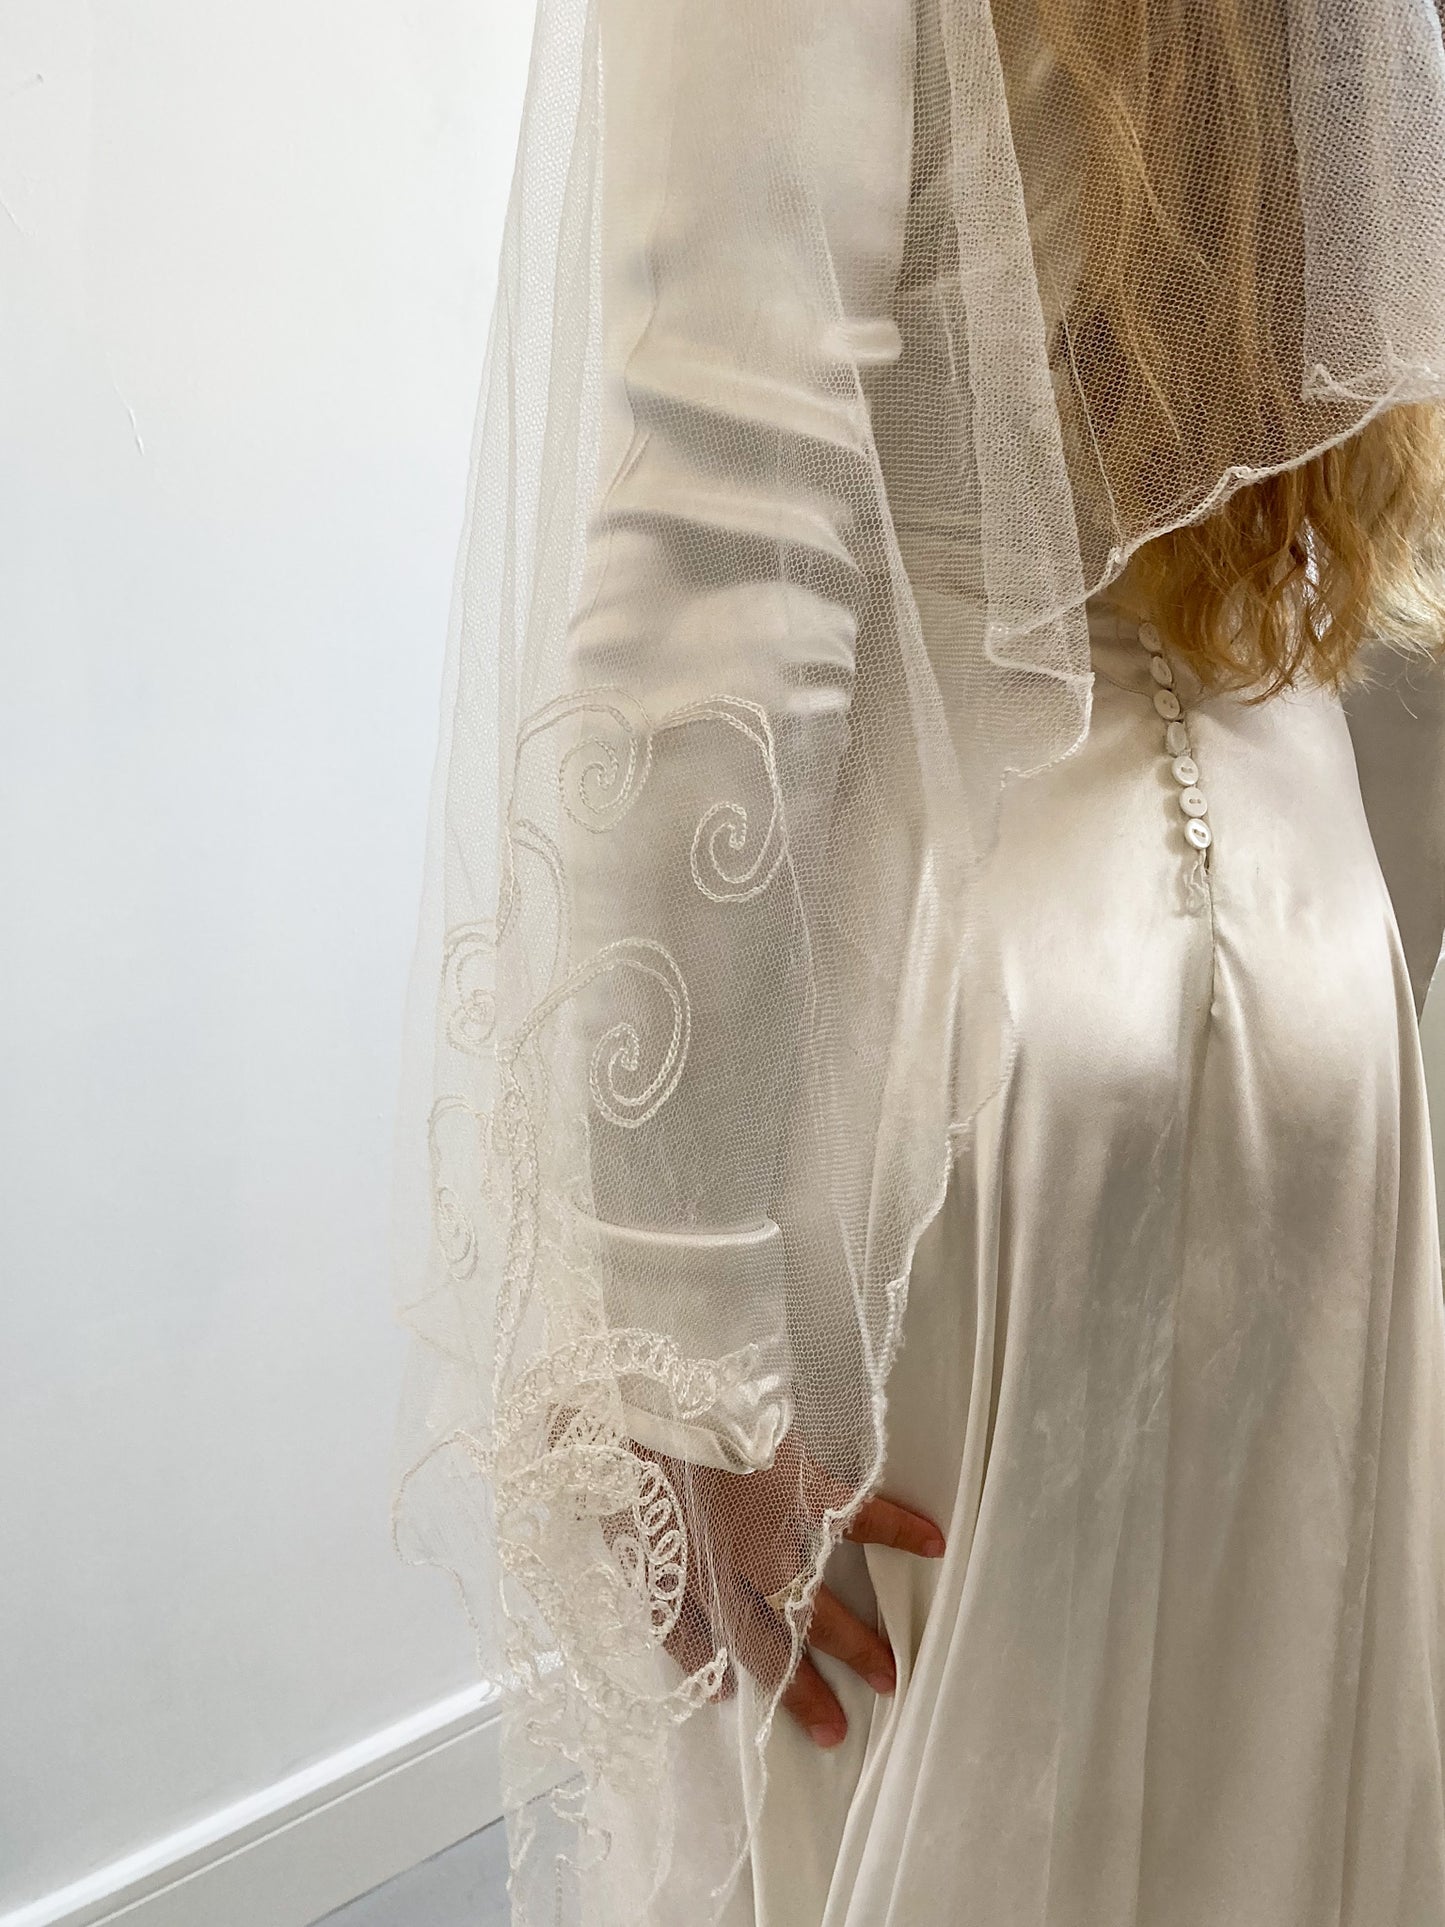 1940s Fine Tulle Veil with Bow Embroidery